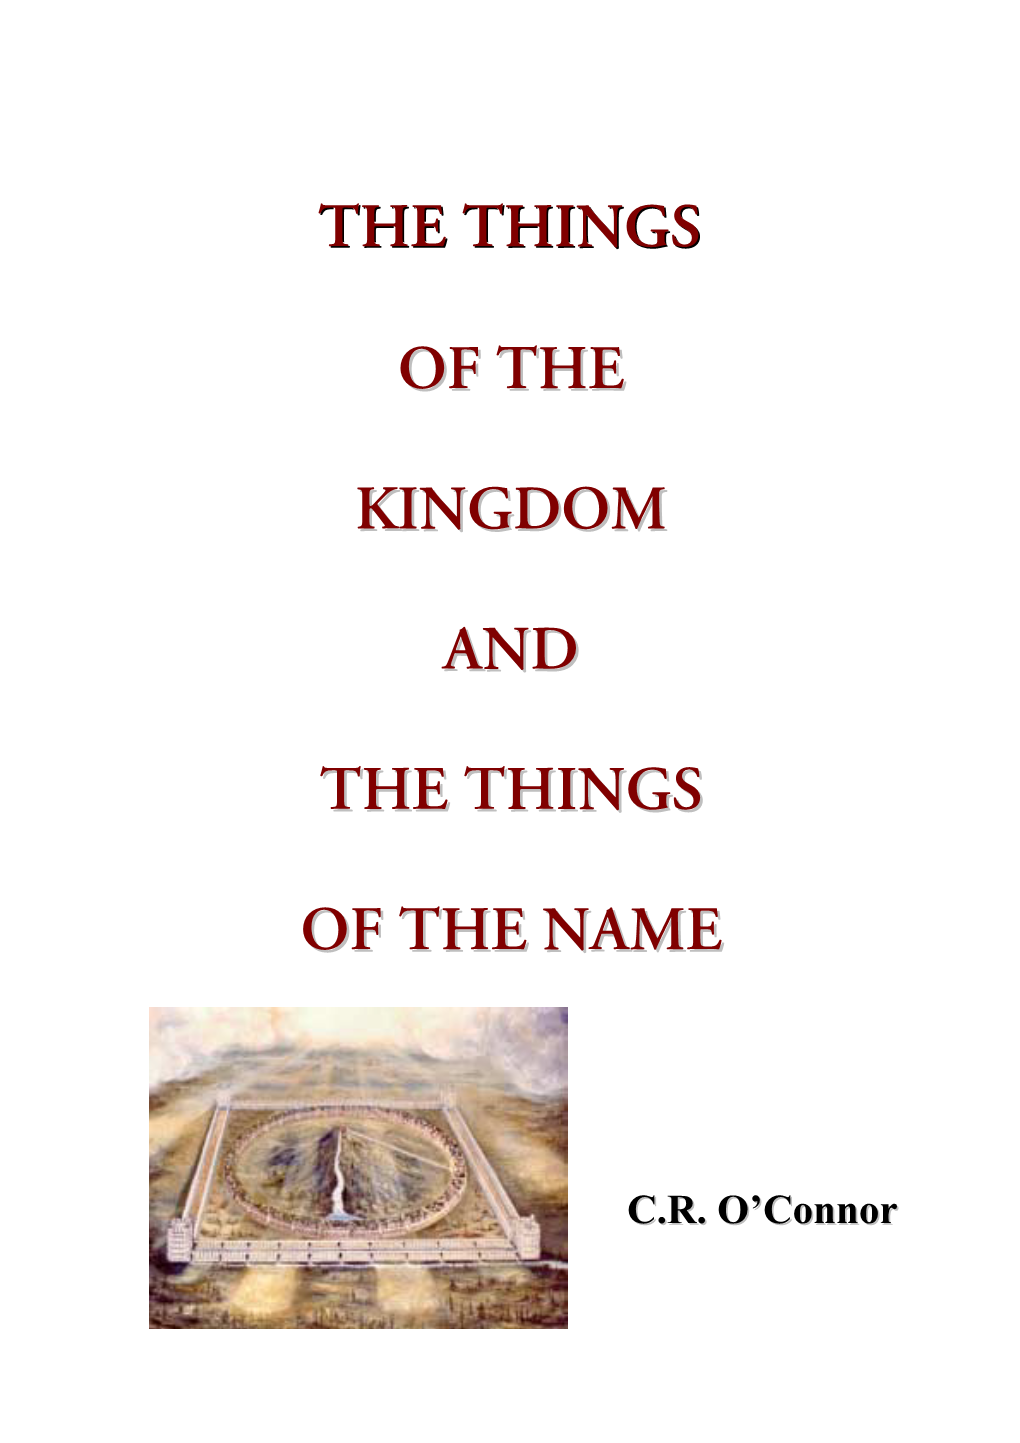 The Things of the Kingdom and the Things of the Name